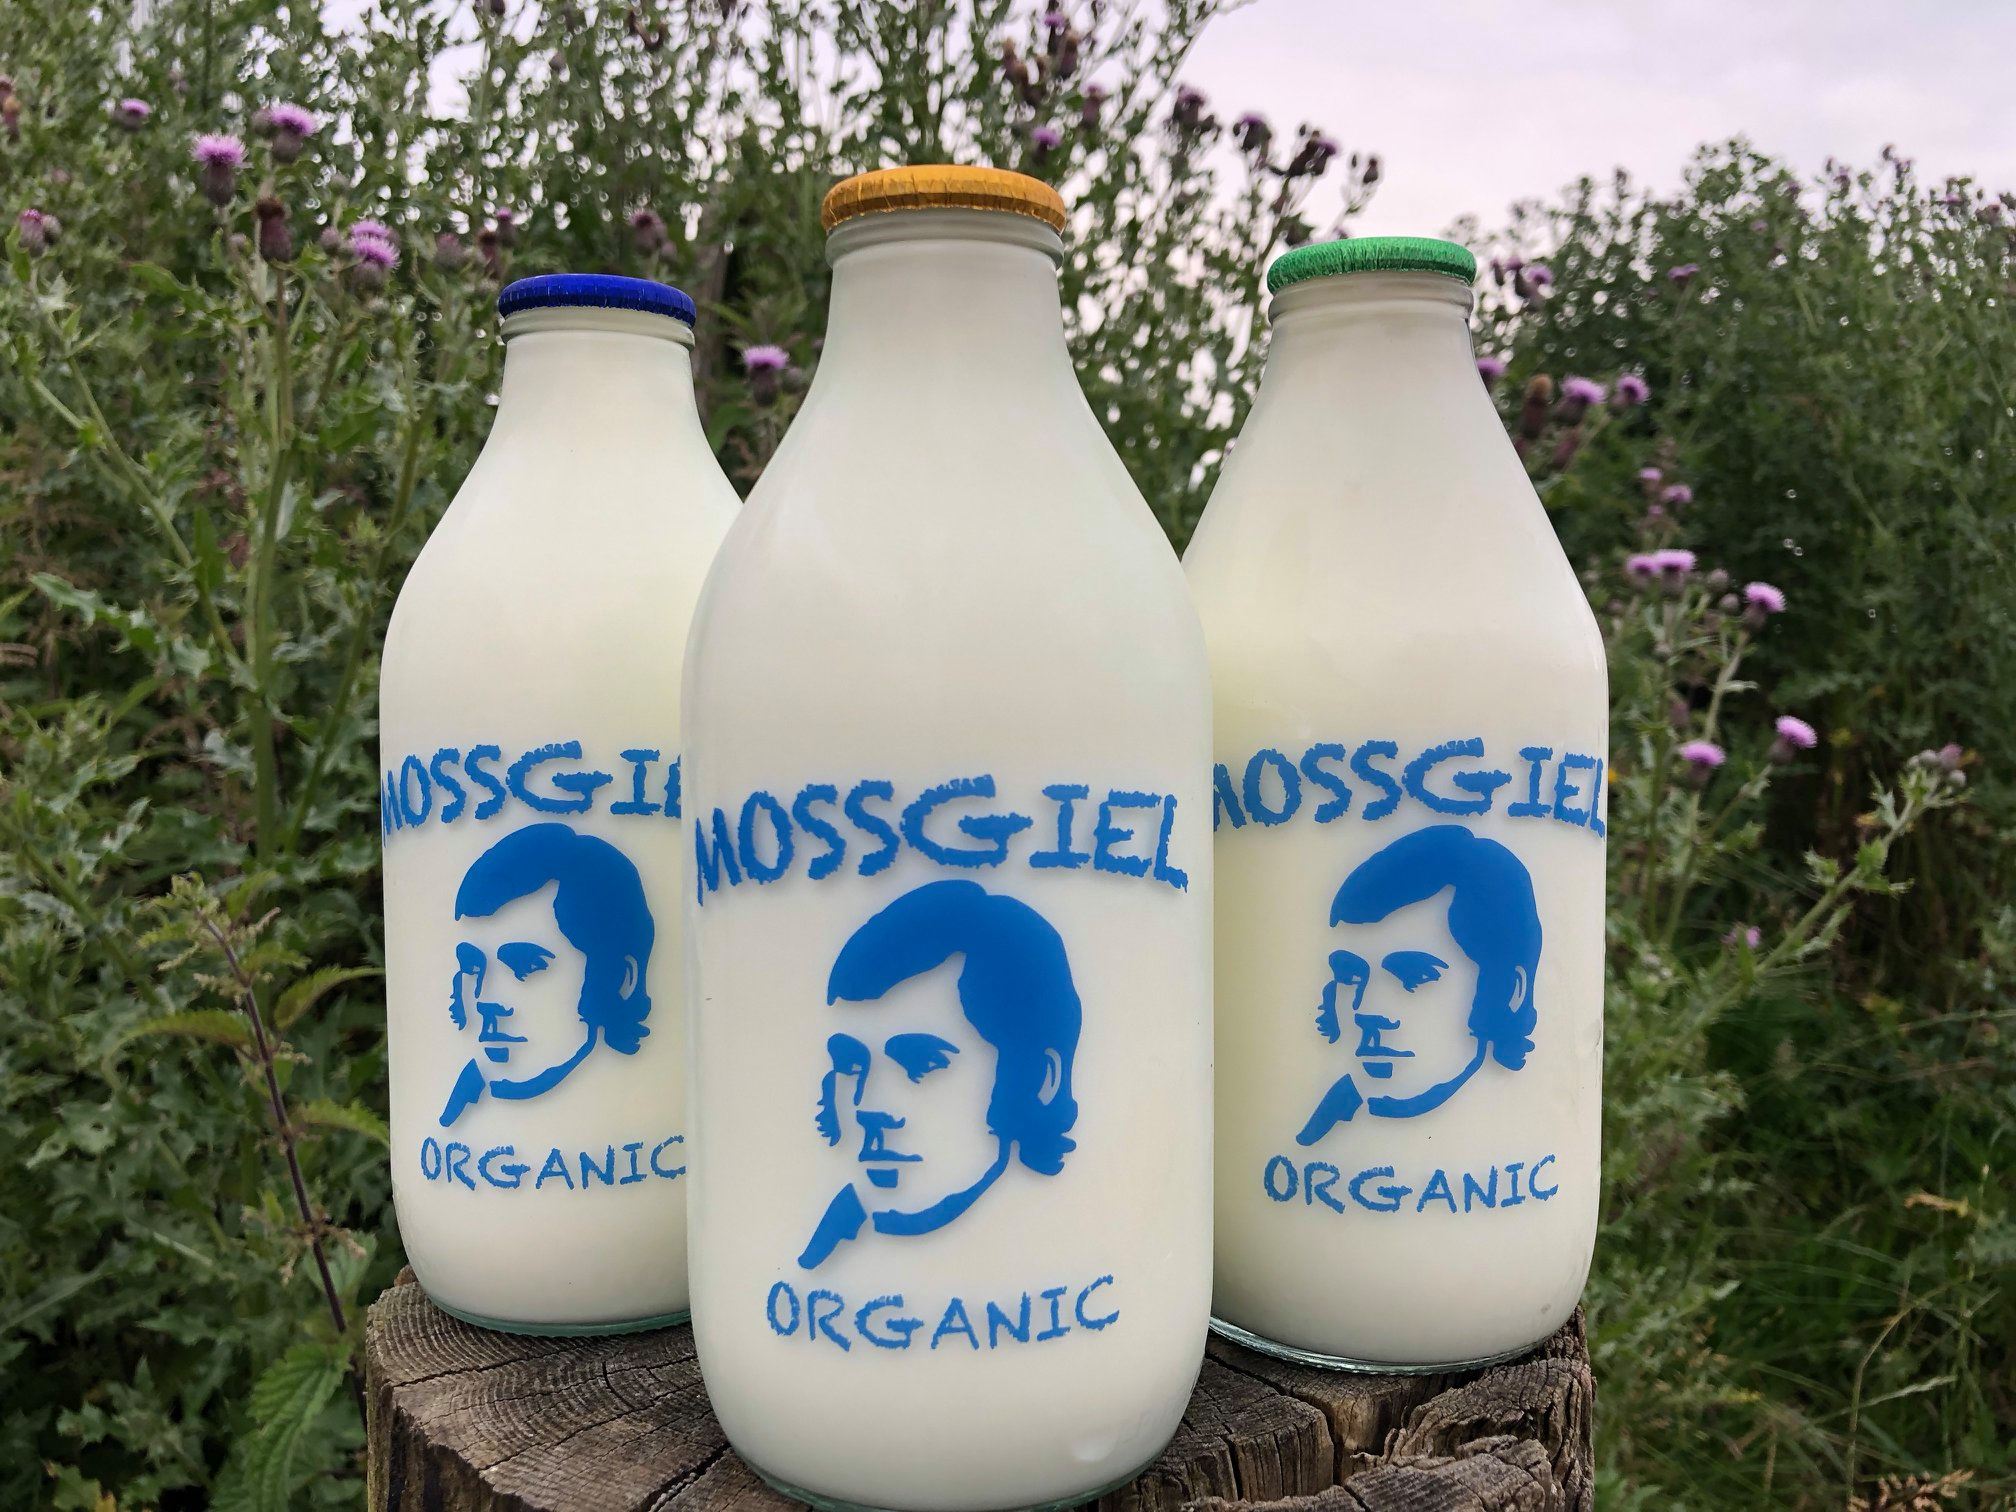 Mossgiel Organic Farm secures funding facility to help moov with the times